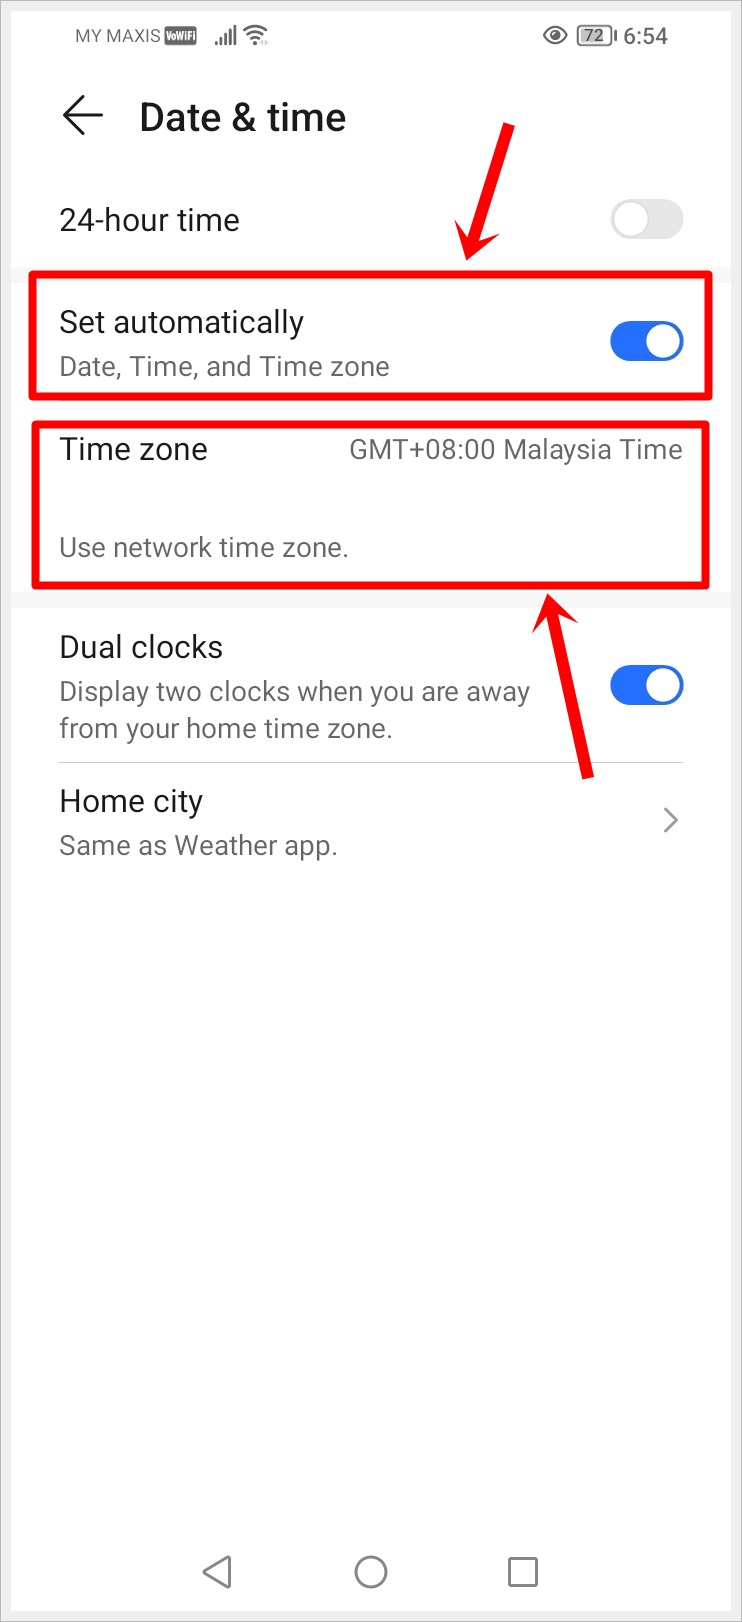 How to Fix "Google Play Services Keeps Stopping" Error: This image shows the "Date & time" page of an Android phone, with the "Set Date, Time, and Time zone" option highlighted.